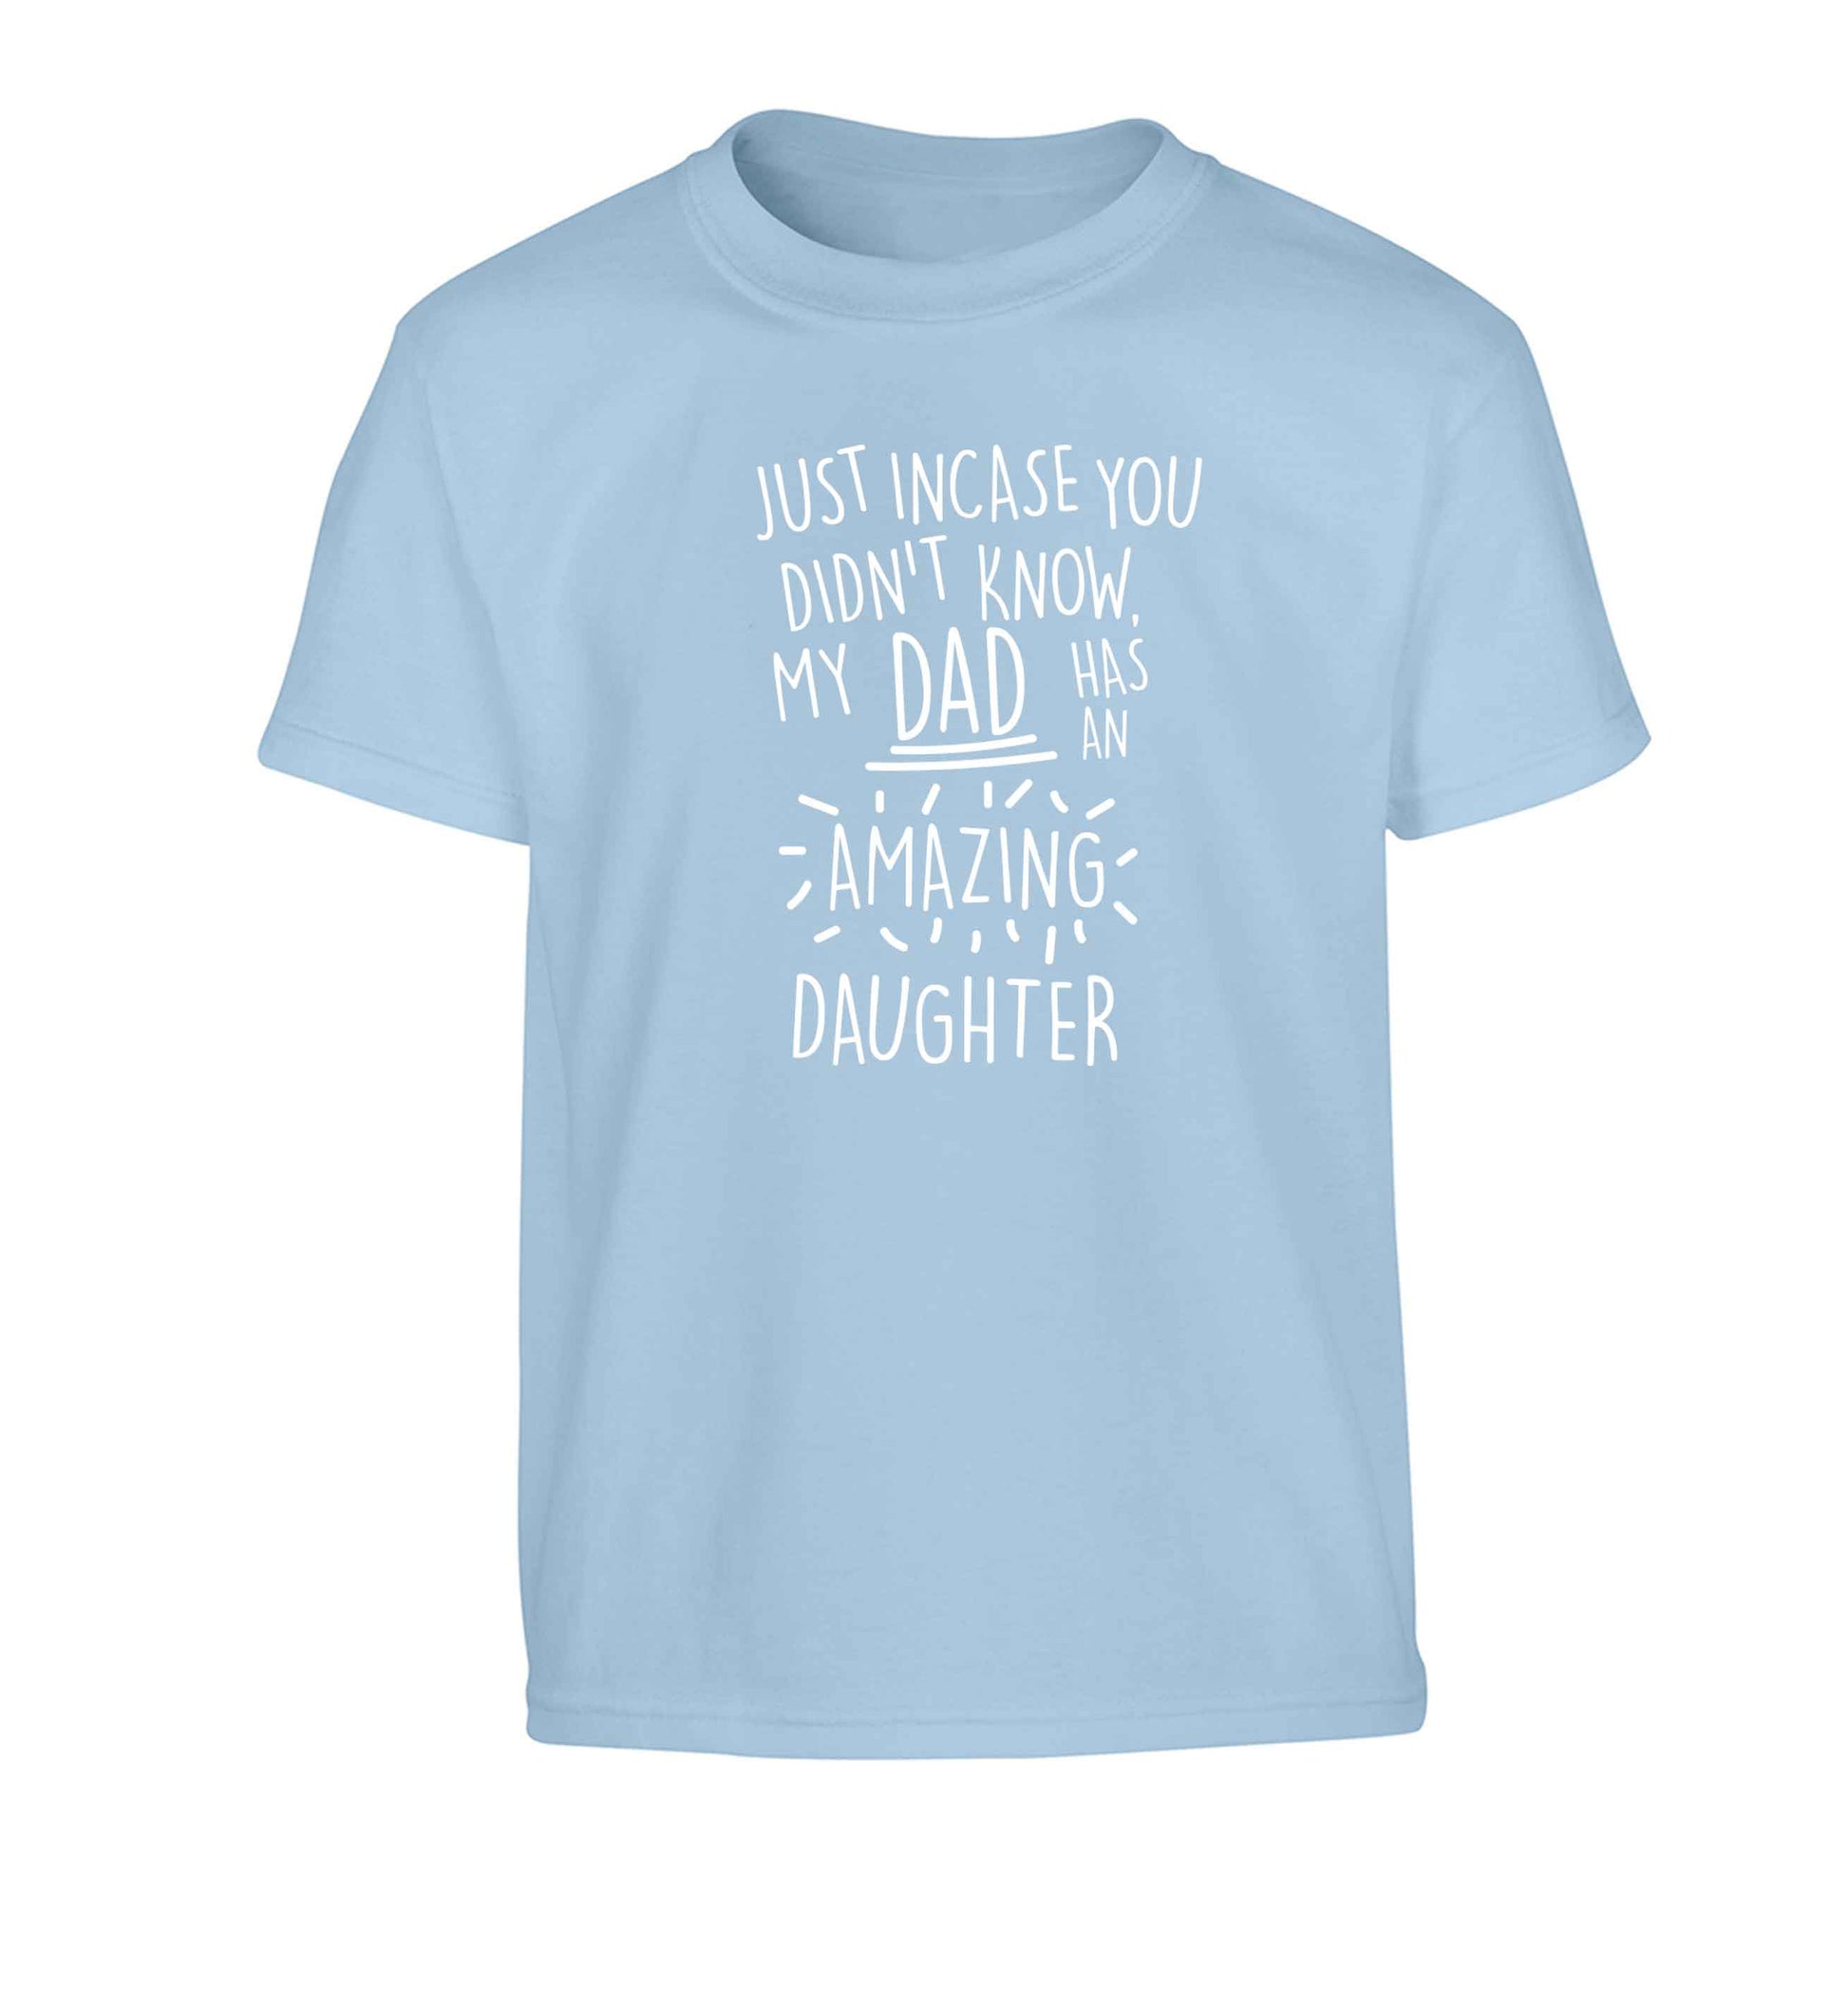 Just incase you didn't know my dad has an amazing daughter Children's light blue Tshirt 12-13 Years